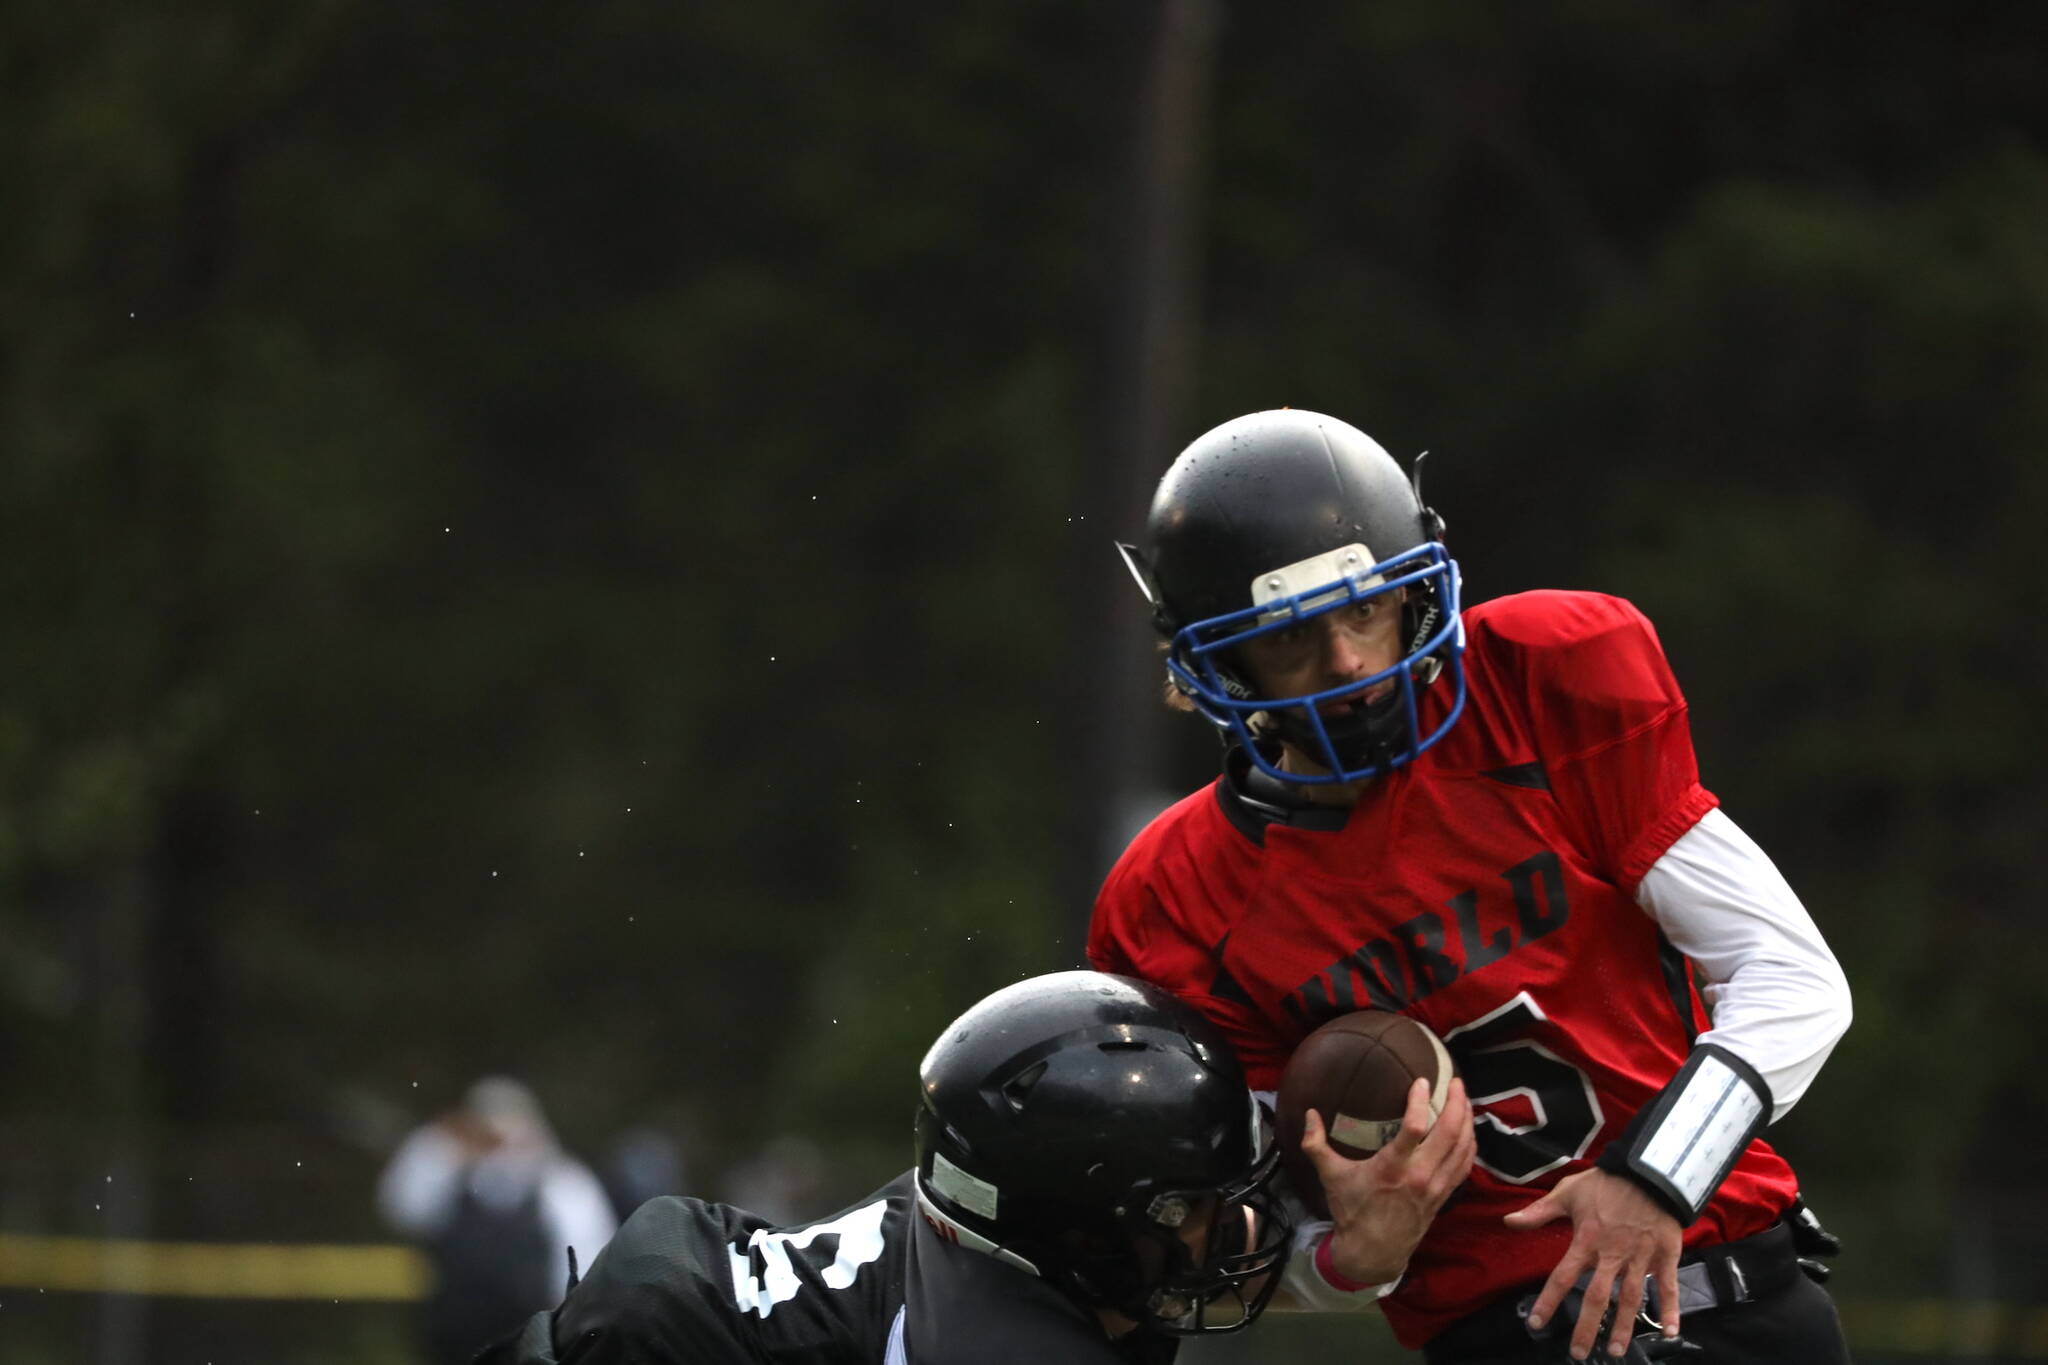 Team World player and 2018 Thunder Mountain High School graduate Jacob Tapia holds tight to the ball while running down the field during the Juneau Alumni Football game on Friday at Adair-Kennedy Memorial Park. (Clarise Larson / Juneau Empire)